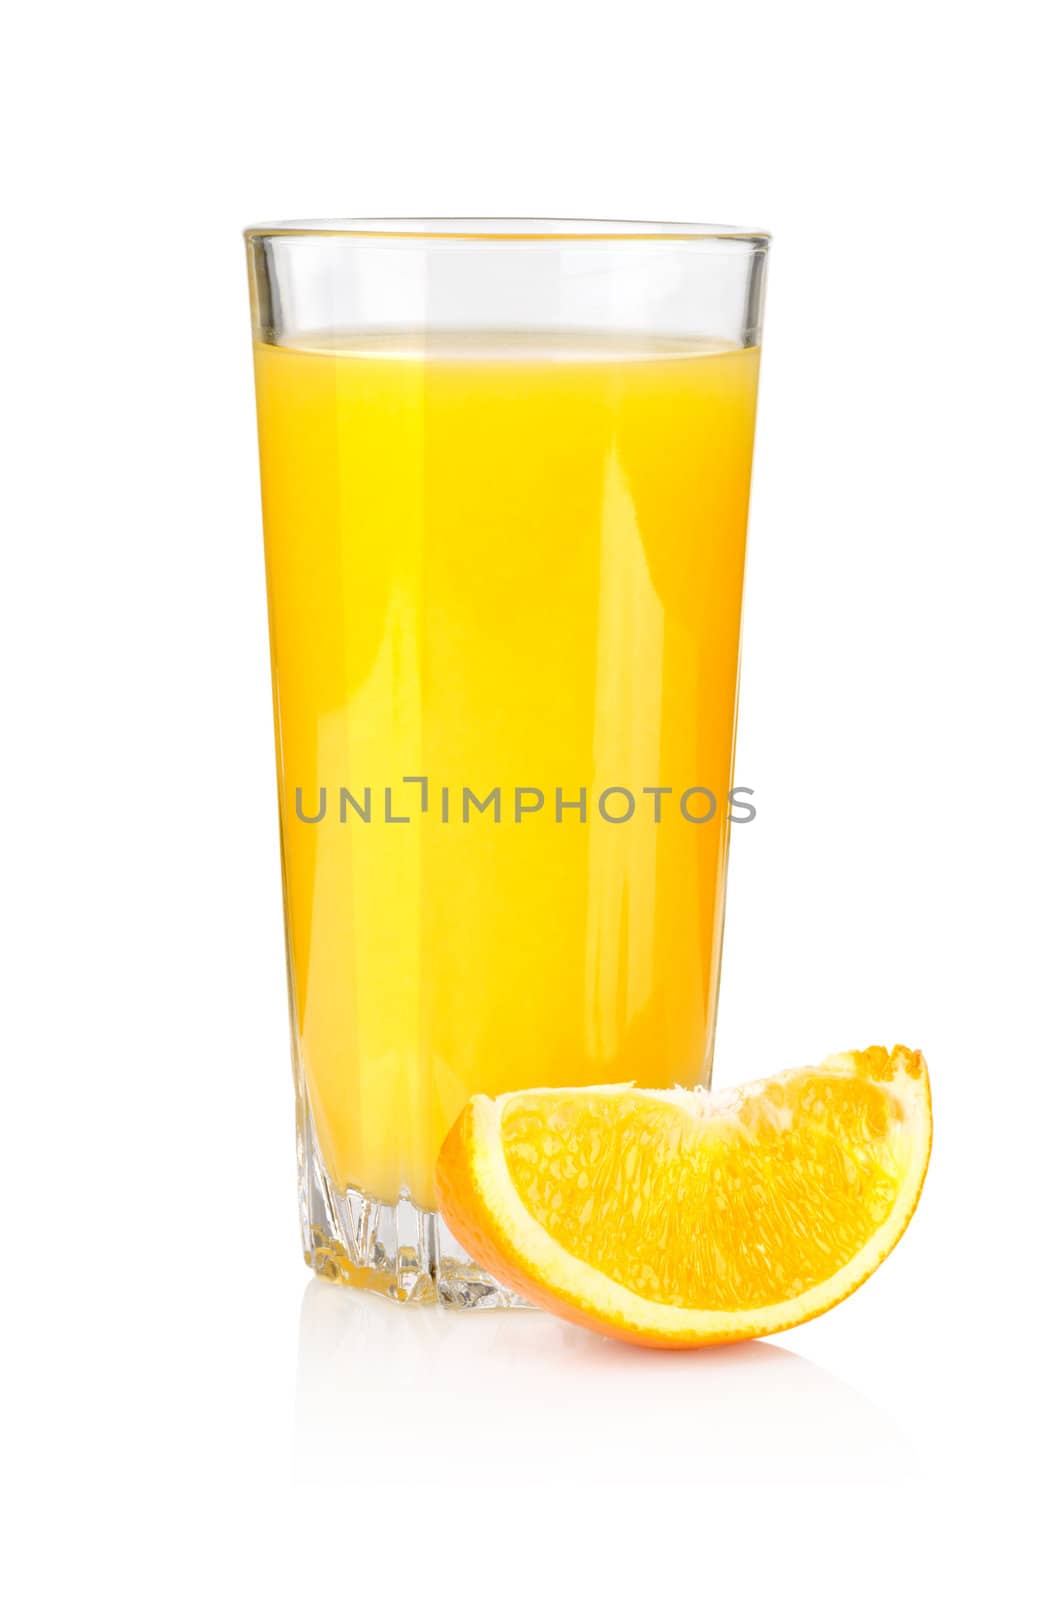 Juice and orange by Givaga